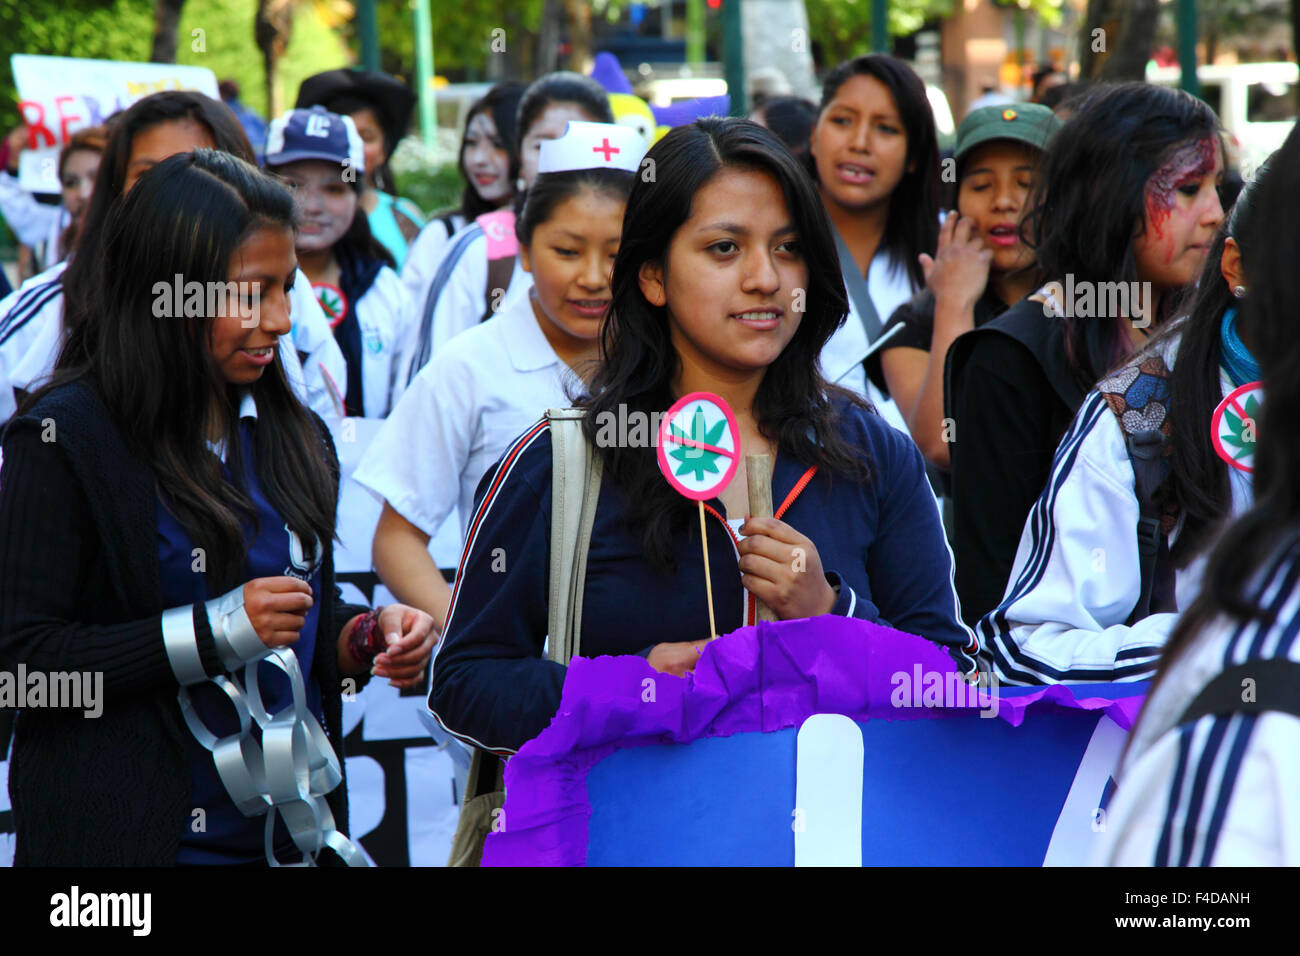 La Paz, Bolivia, 16th October 2015. A female student carries a 'No Marijuana' sign during a march through La Paz city centre warning of the dangers of drug use. The demonstration is organised every year by the police together with schools and colleges to educate and raise awareness about drugs and their dangers. Credit: James Brunker / Alamy Live News Stock Photo